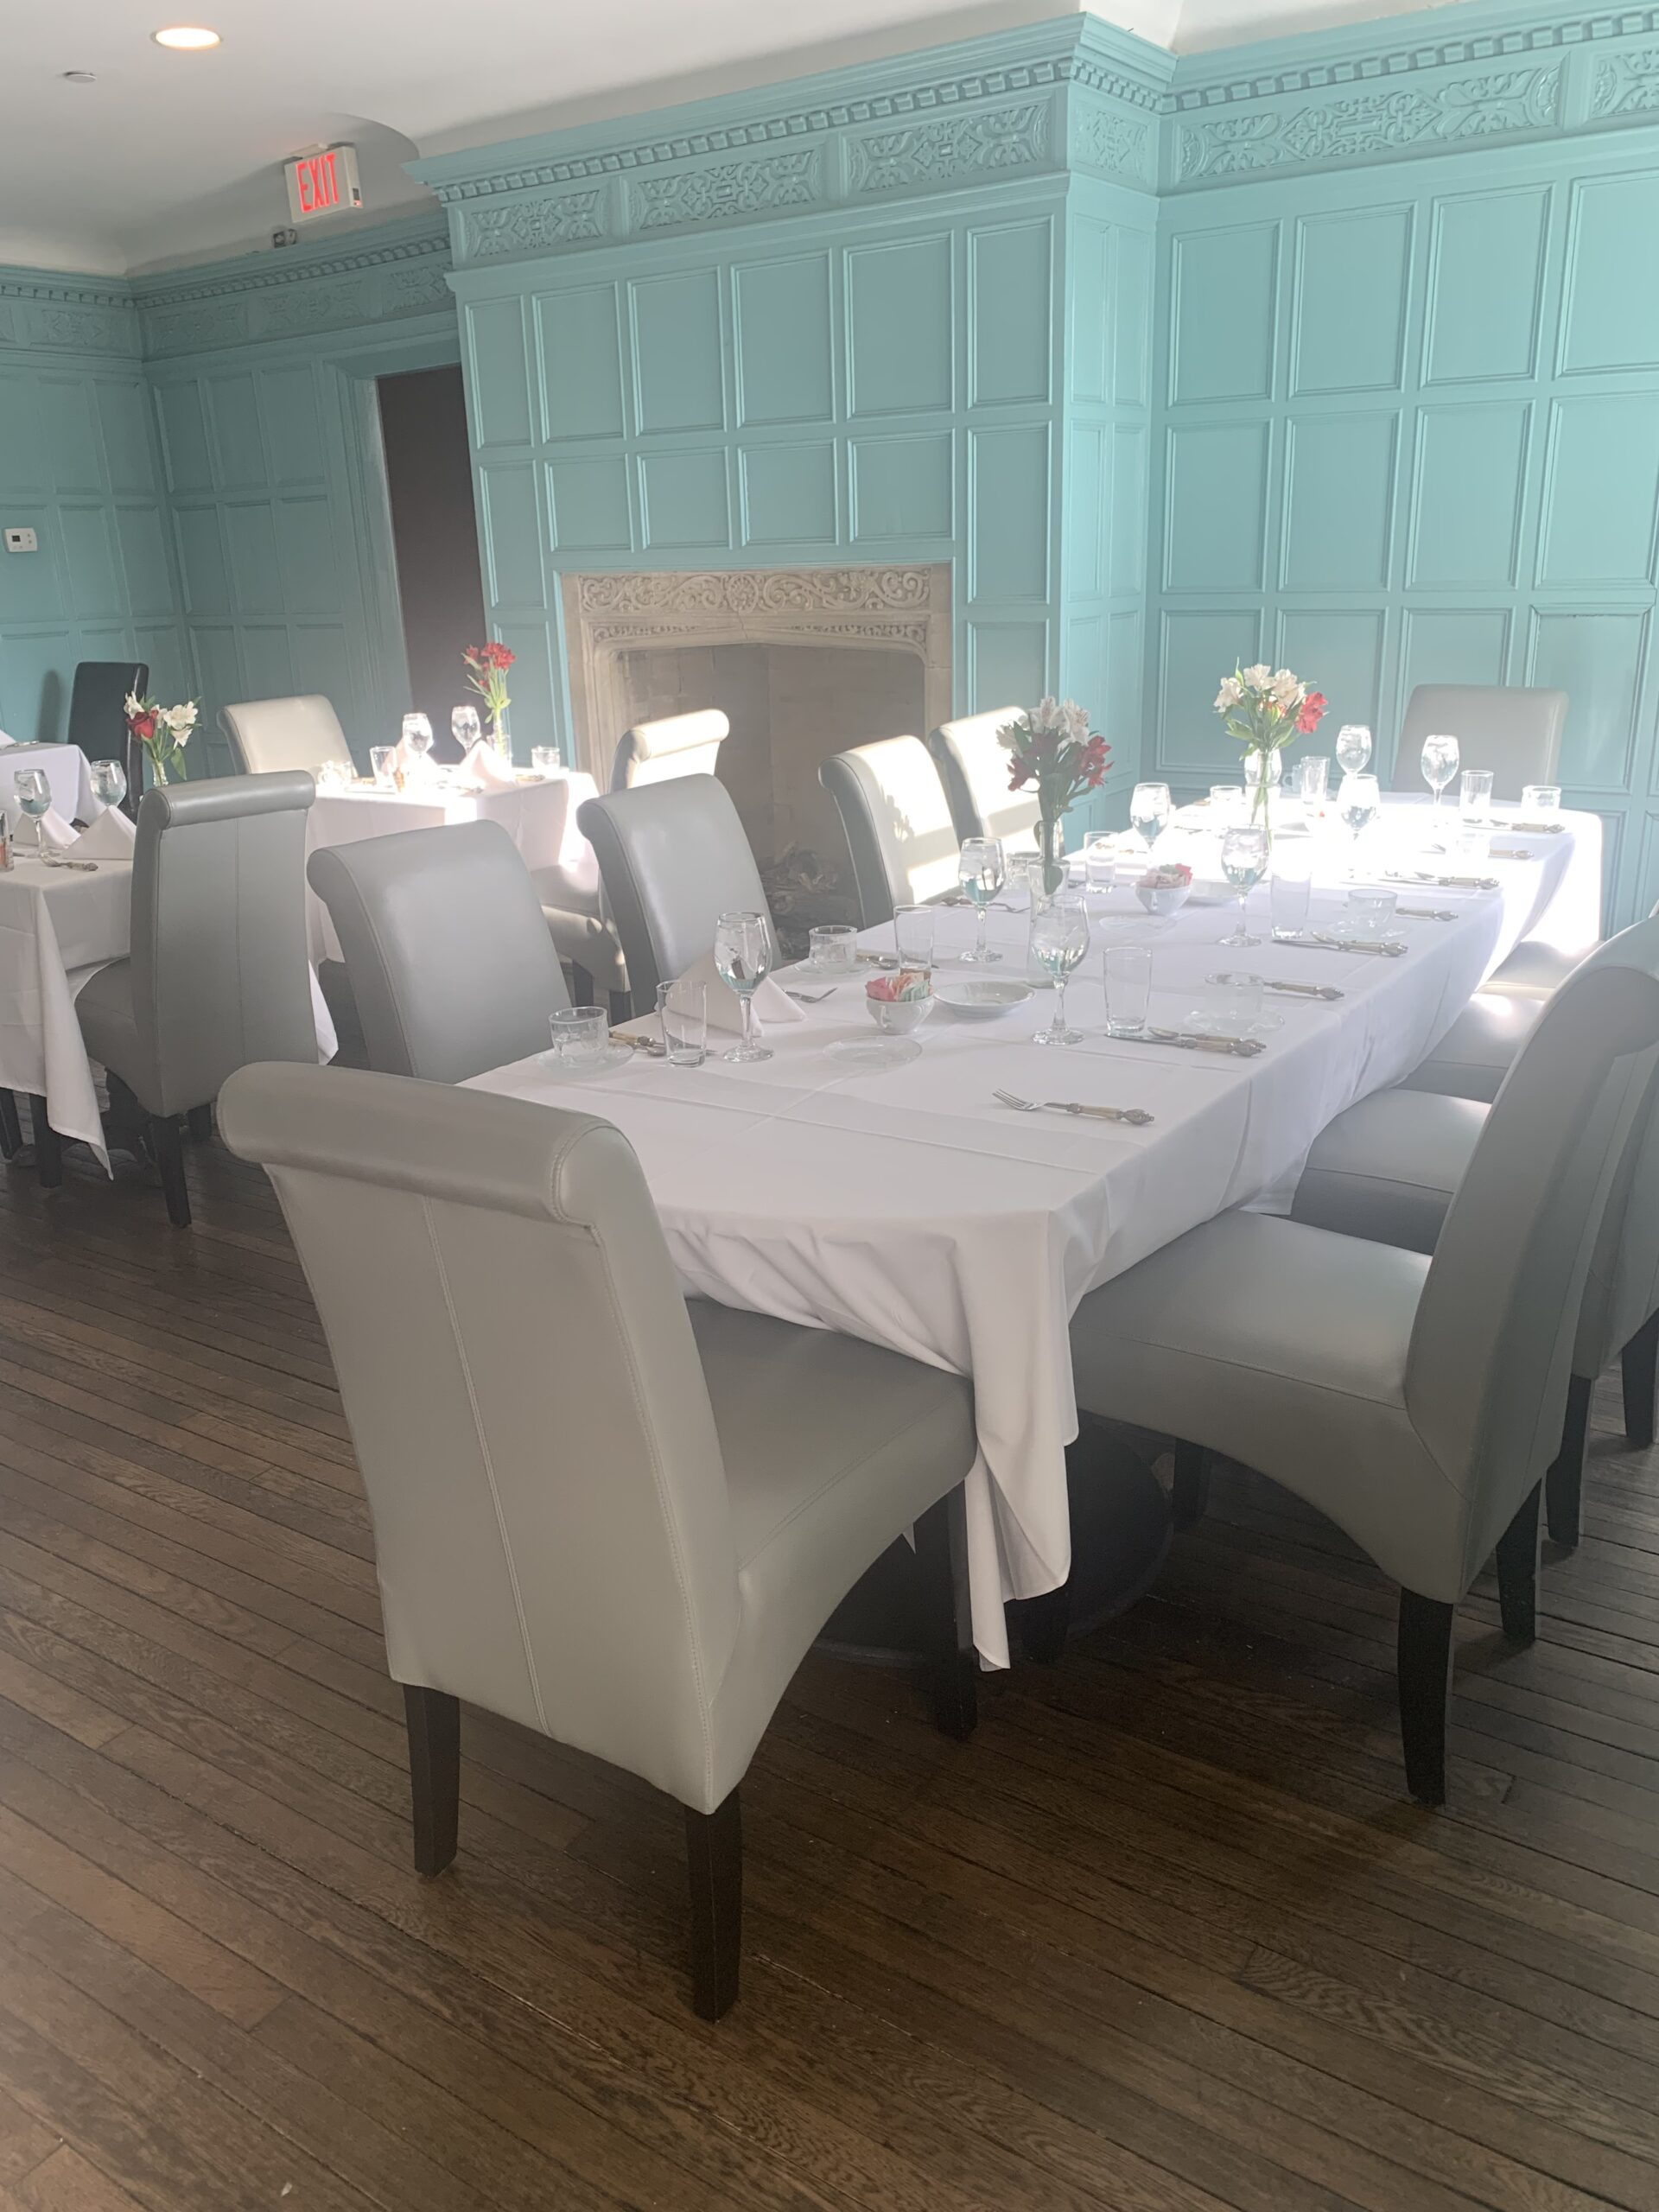 Dining area for most meals at The Mansion at Noble Lane